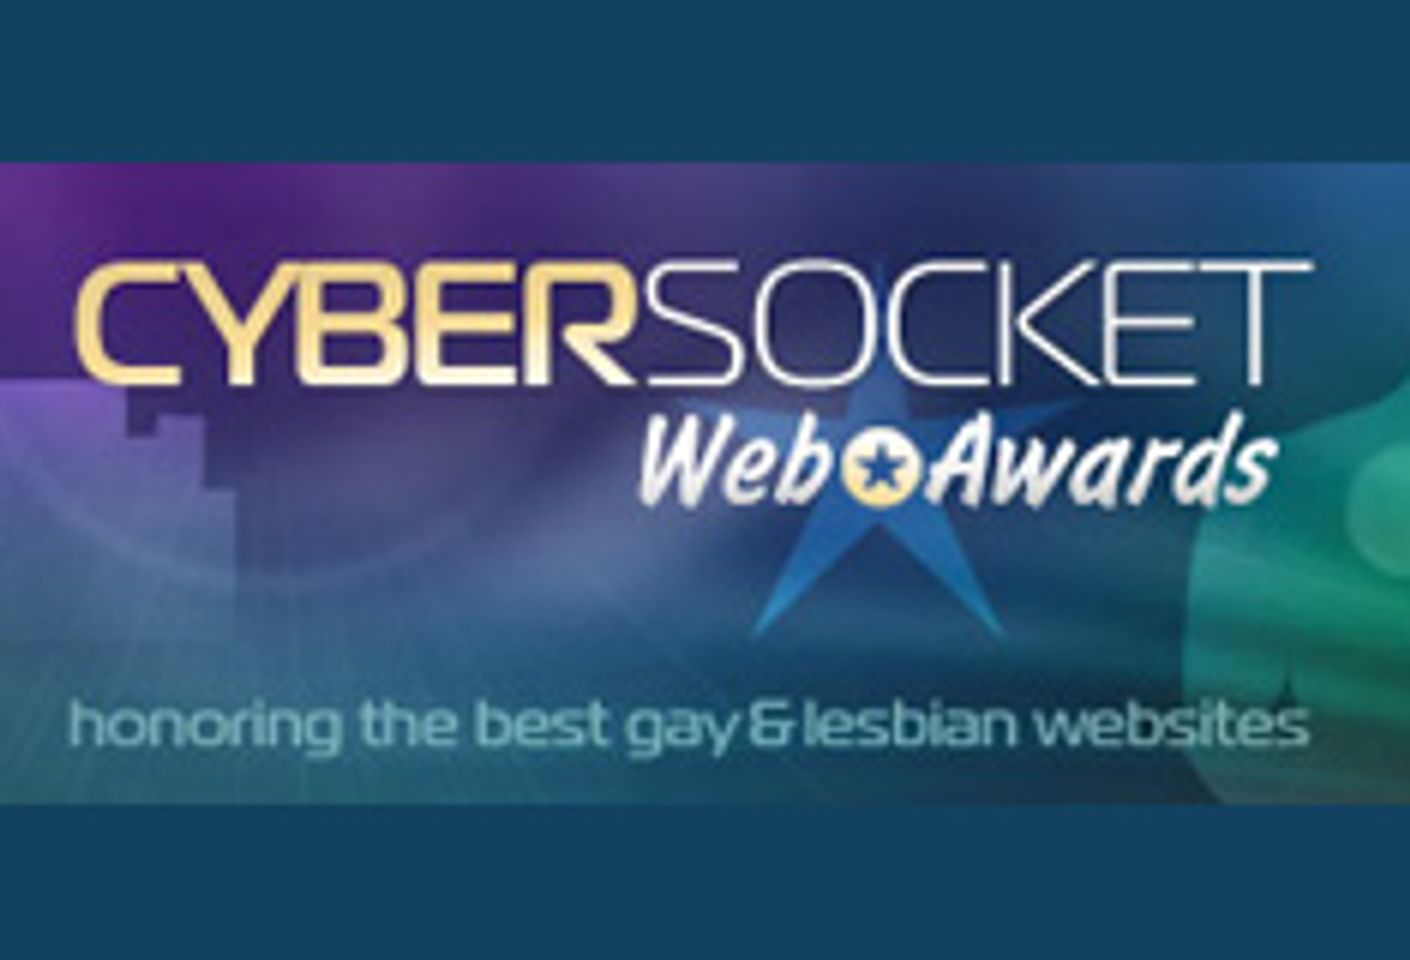 Last Chance to Vote in the 10th Annual Cybersocket Web Awards